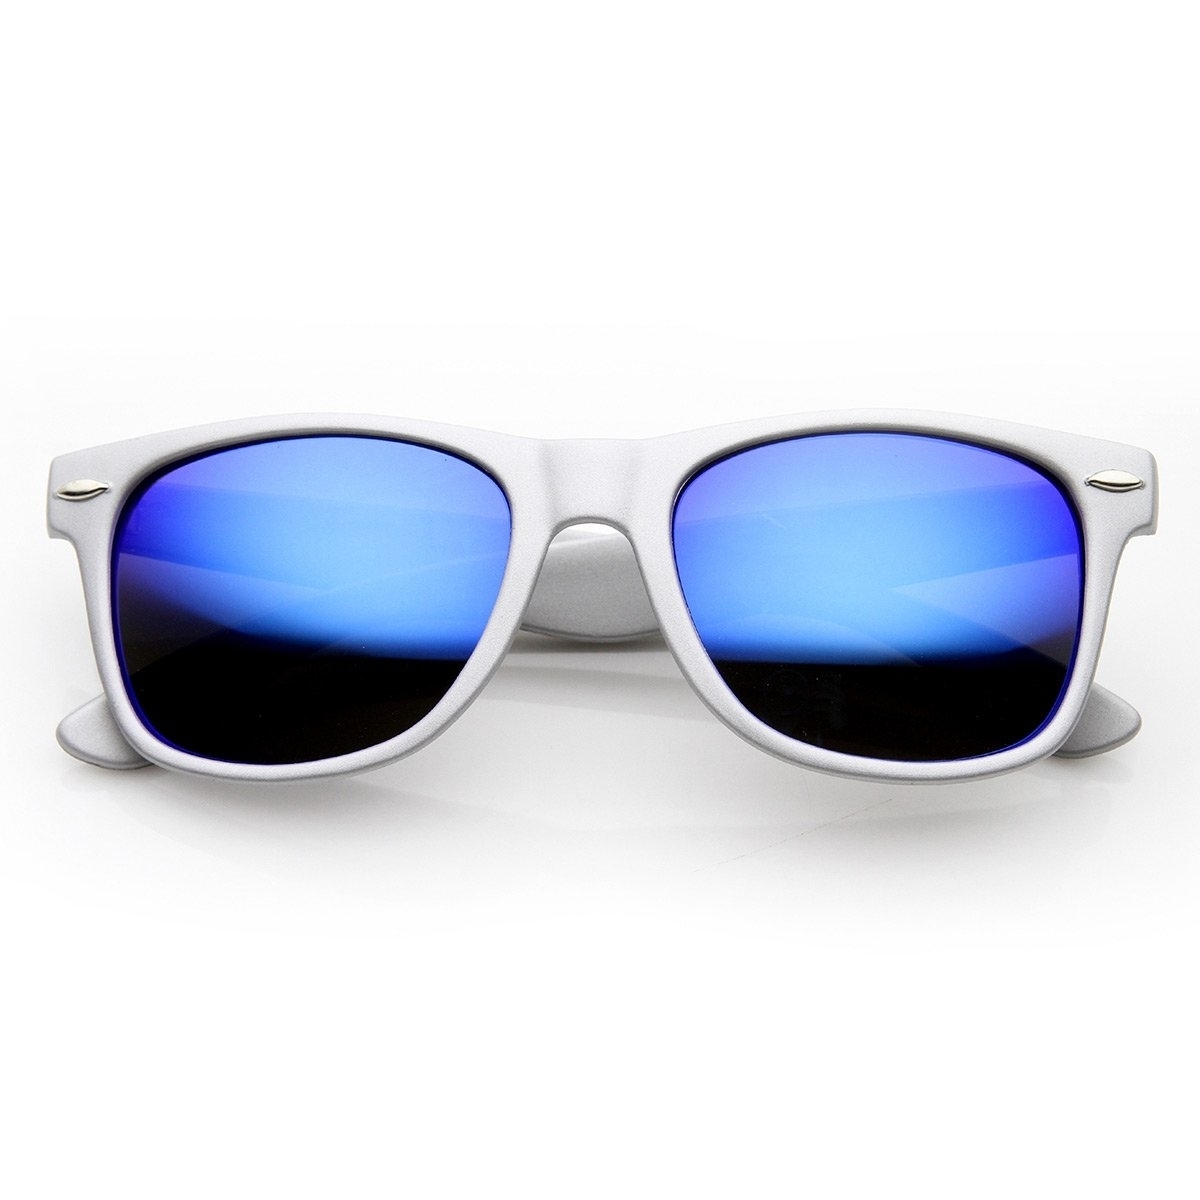 Classic Horn Rimmed Sunglasses With Flash Mirro Lens - Grey Midnight